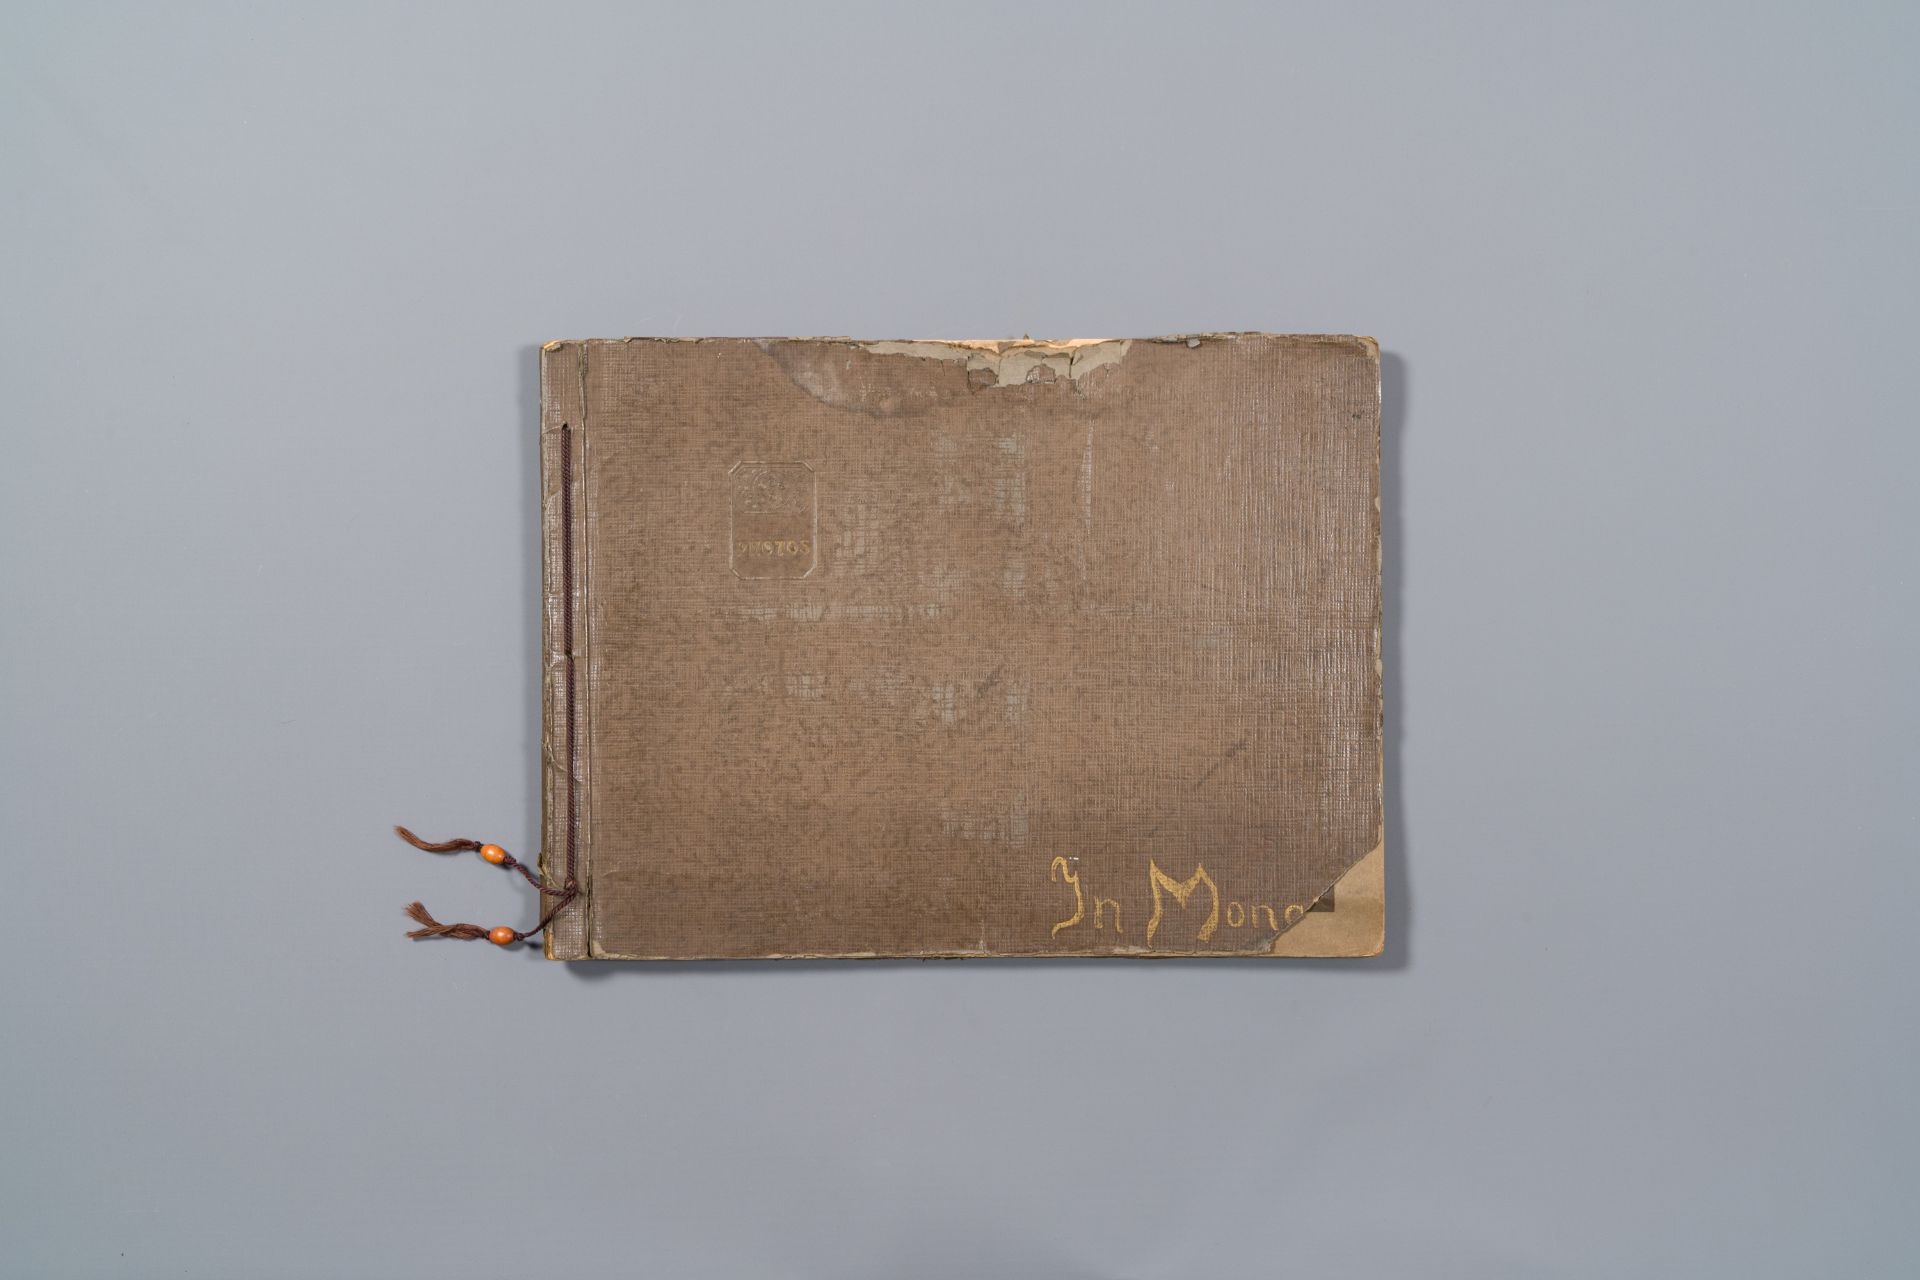 A photo album from a Belgian Catholic mission in Inner Mongolia in China, ca. 1924 - Image 2 of 10